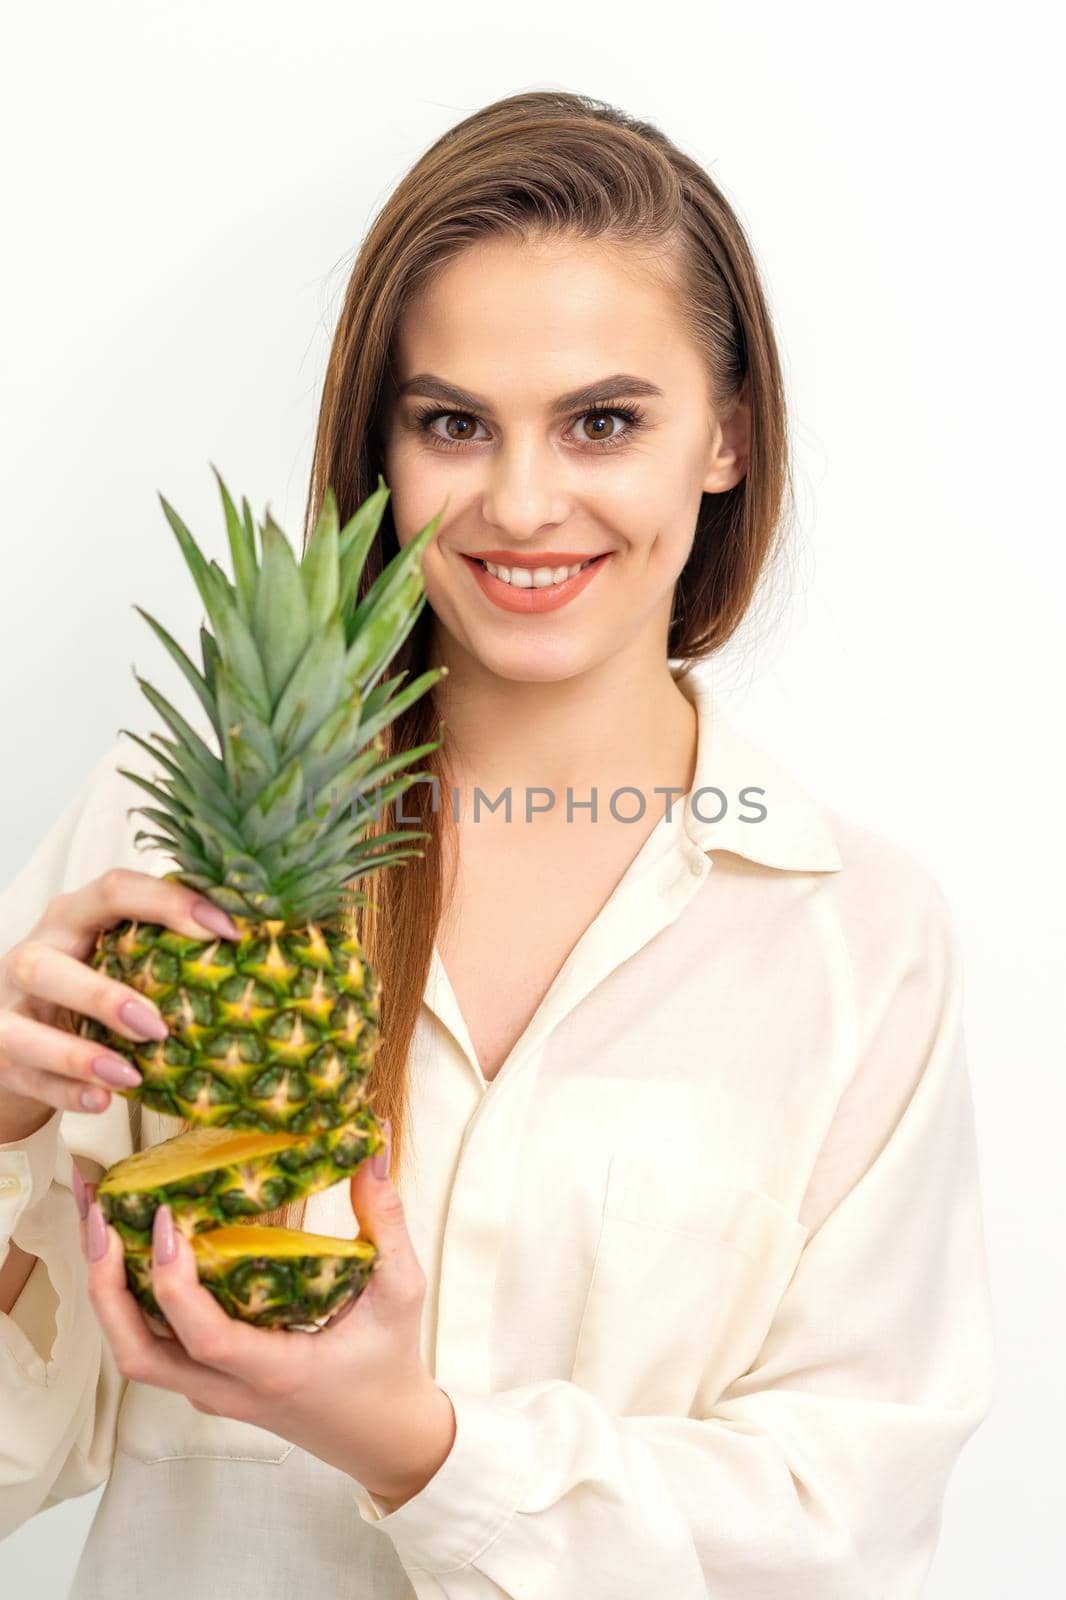 Beautiful young Caucasian woman holding pineapple and smiling, wearing a white shirt over white background